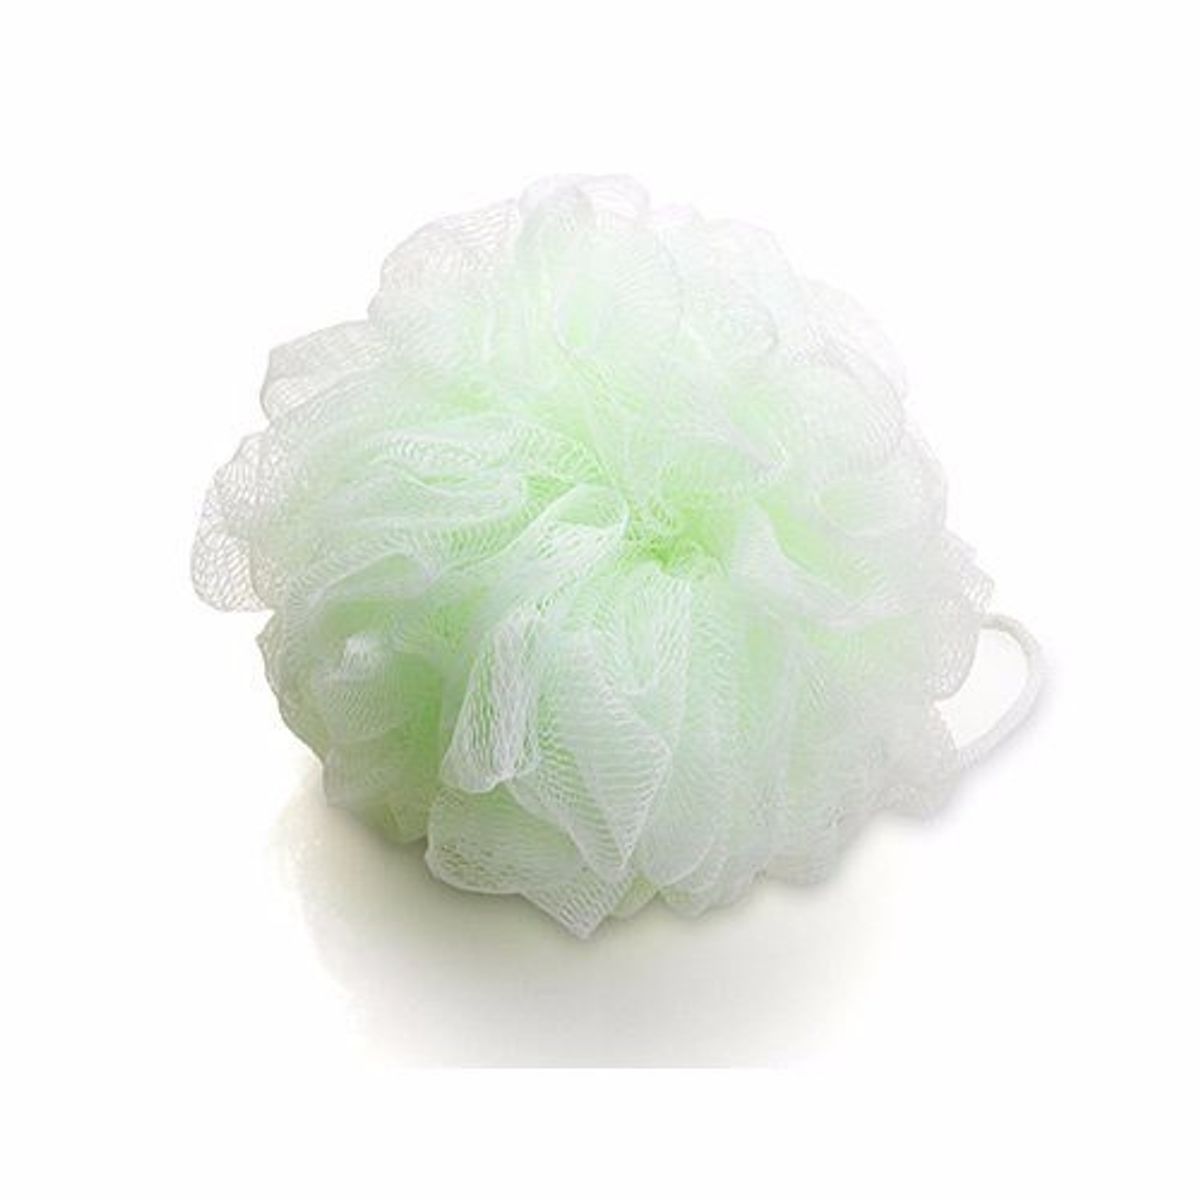 bong-tam-tron-thefaceshop-daily-beauty-tools-shower-puff-1pcs-2